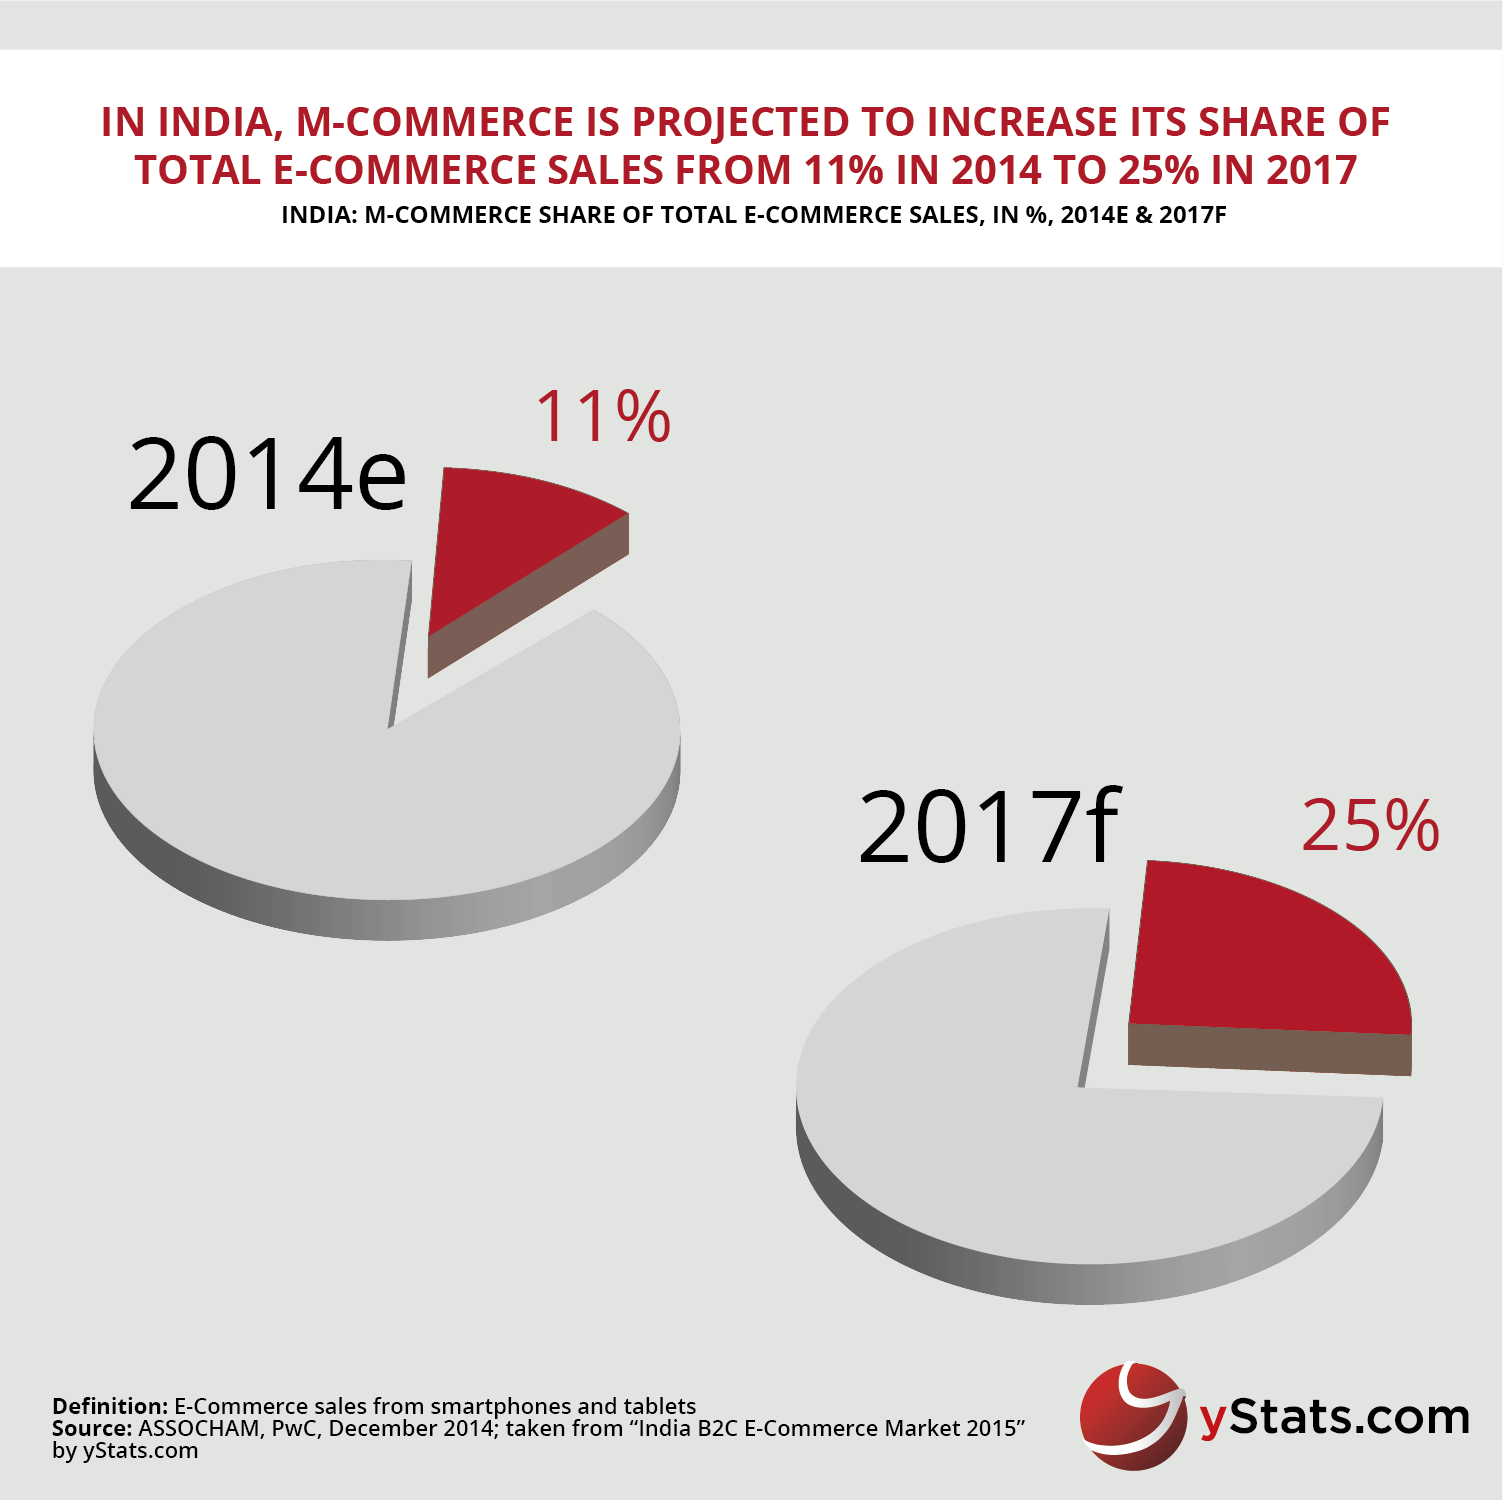 Infographic: In India, M-Commerce is projected to increase its share of total E-Commerce sales from 11% in 2014 to 25% in 2017